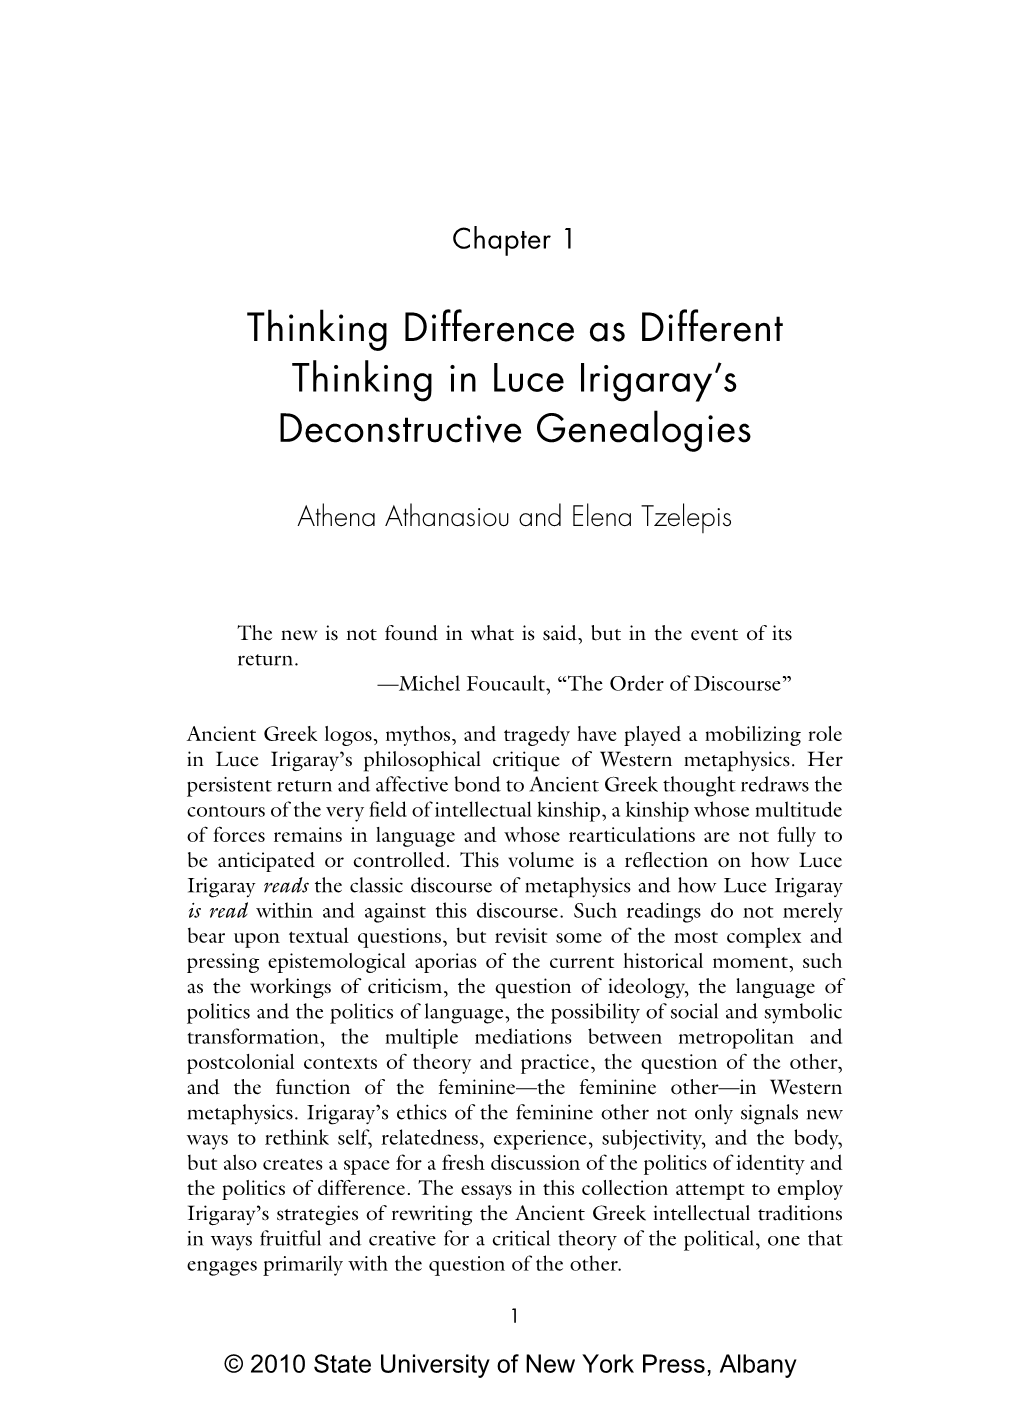 Thinking Difference As Different Thinking in Luce Irigaray's